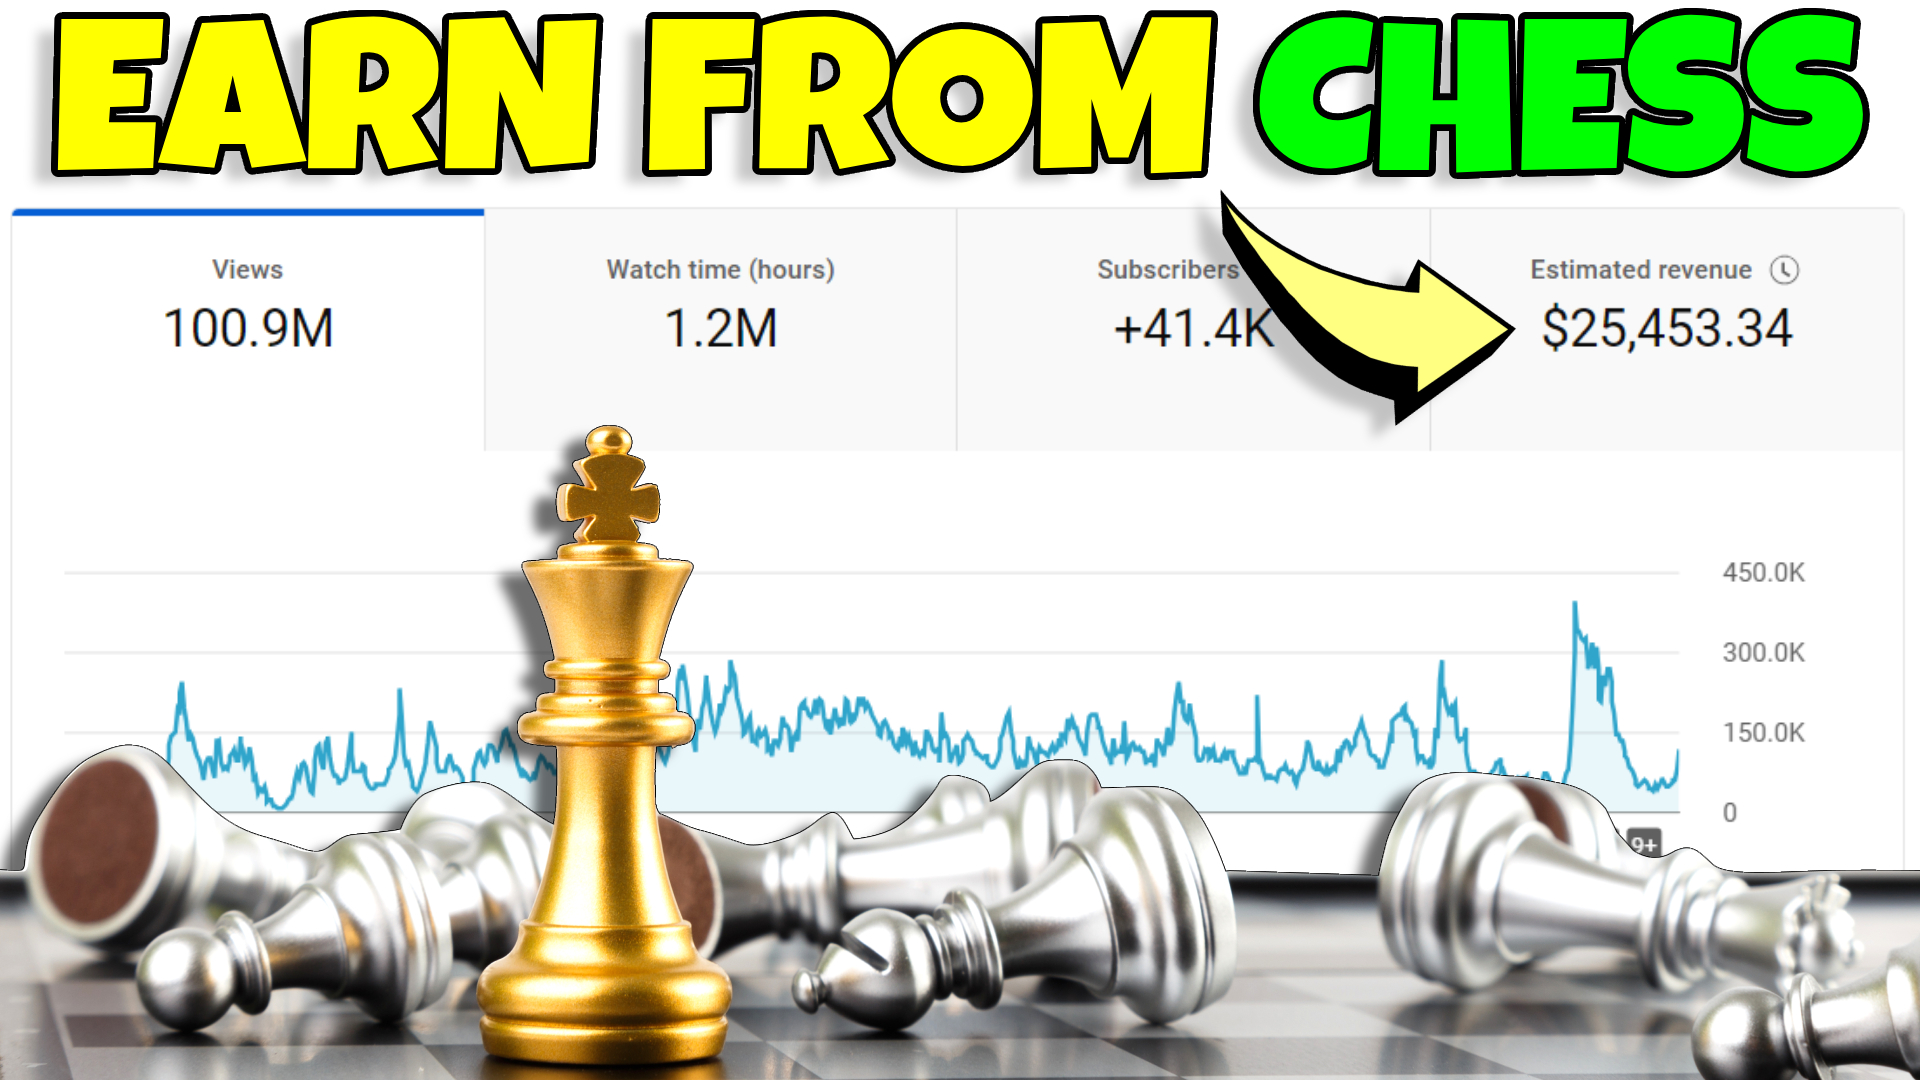 how much does Gothamchess make per day? 